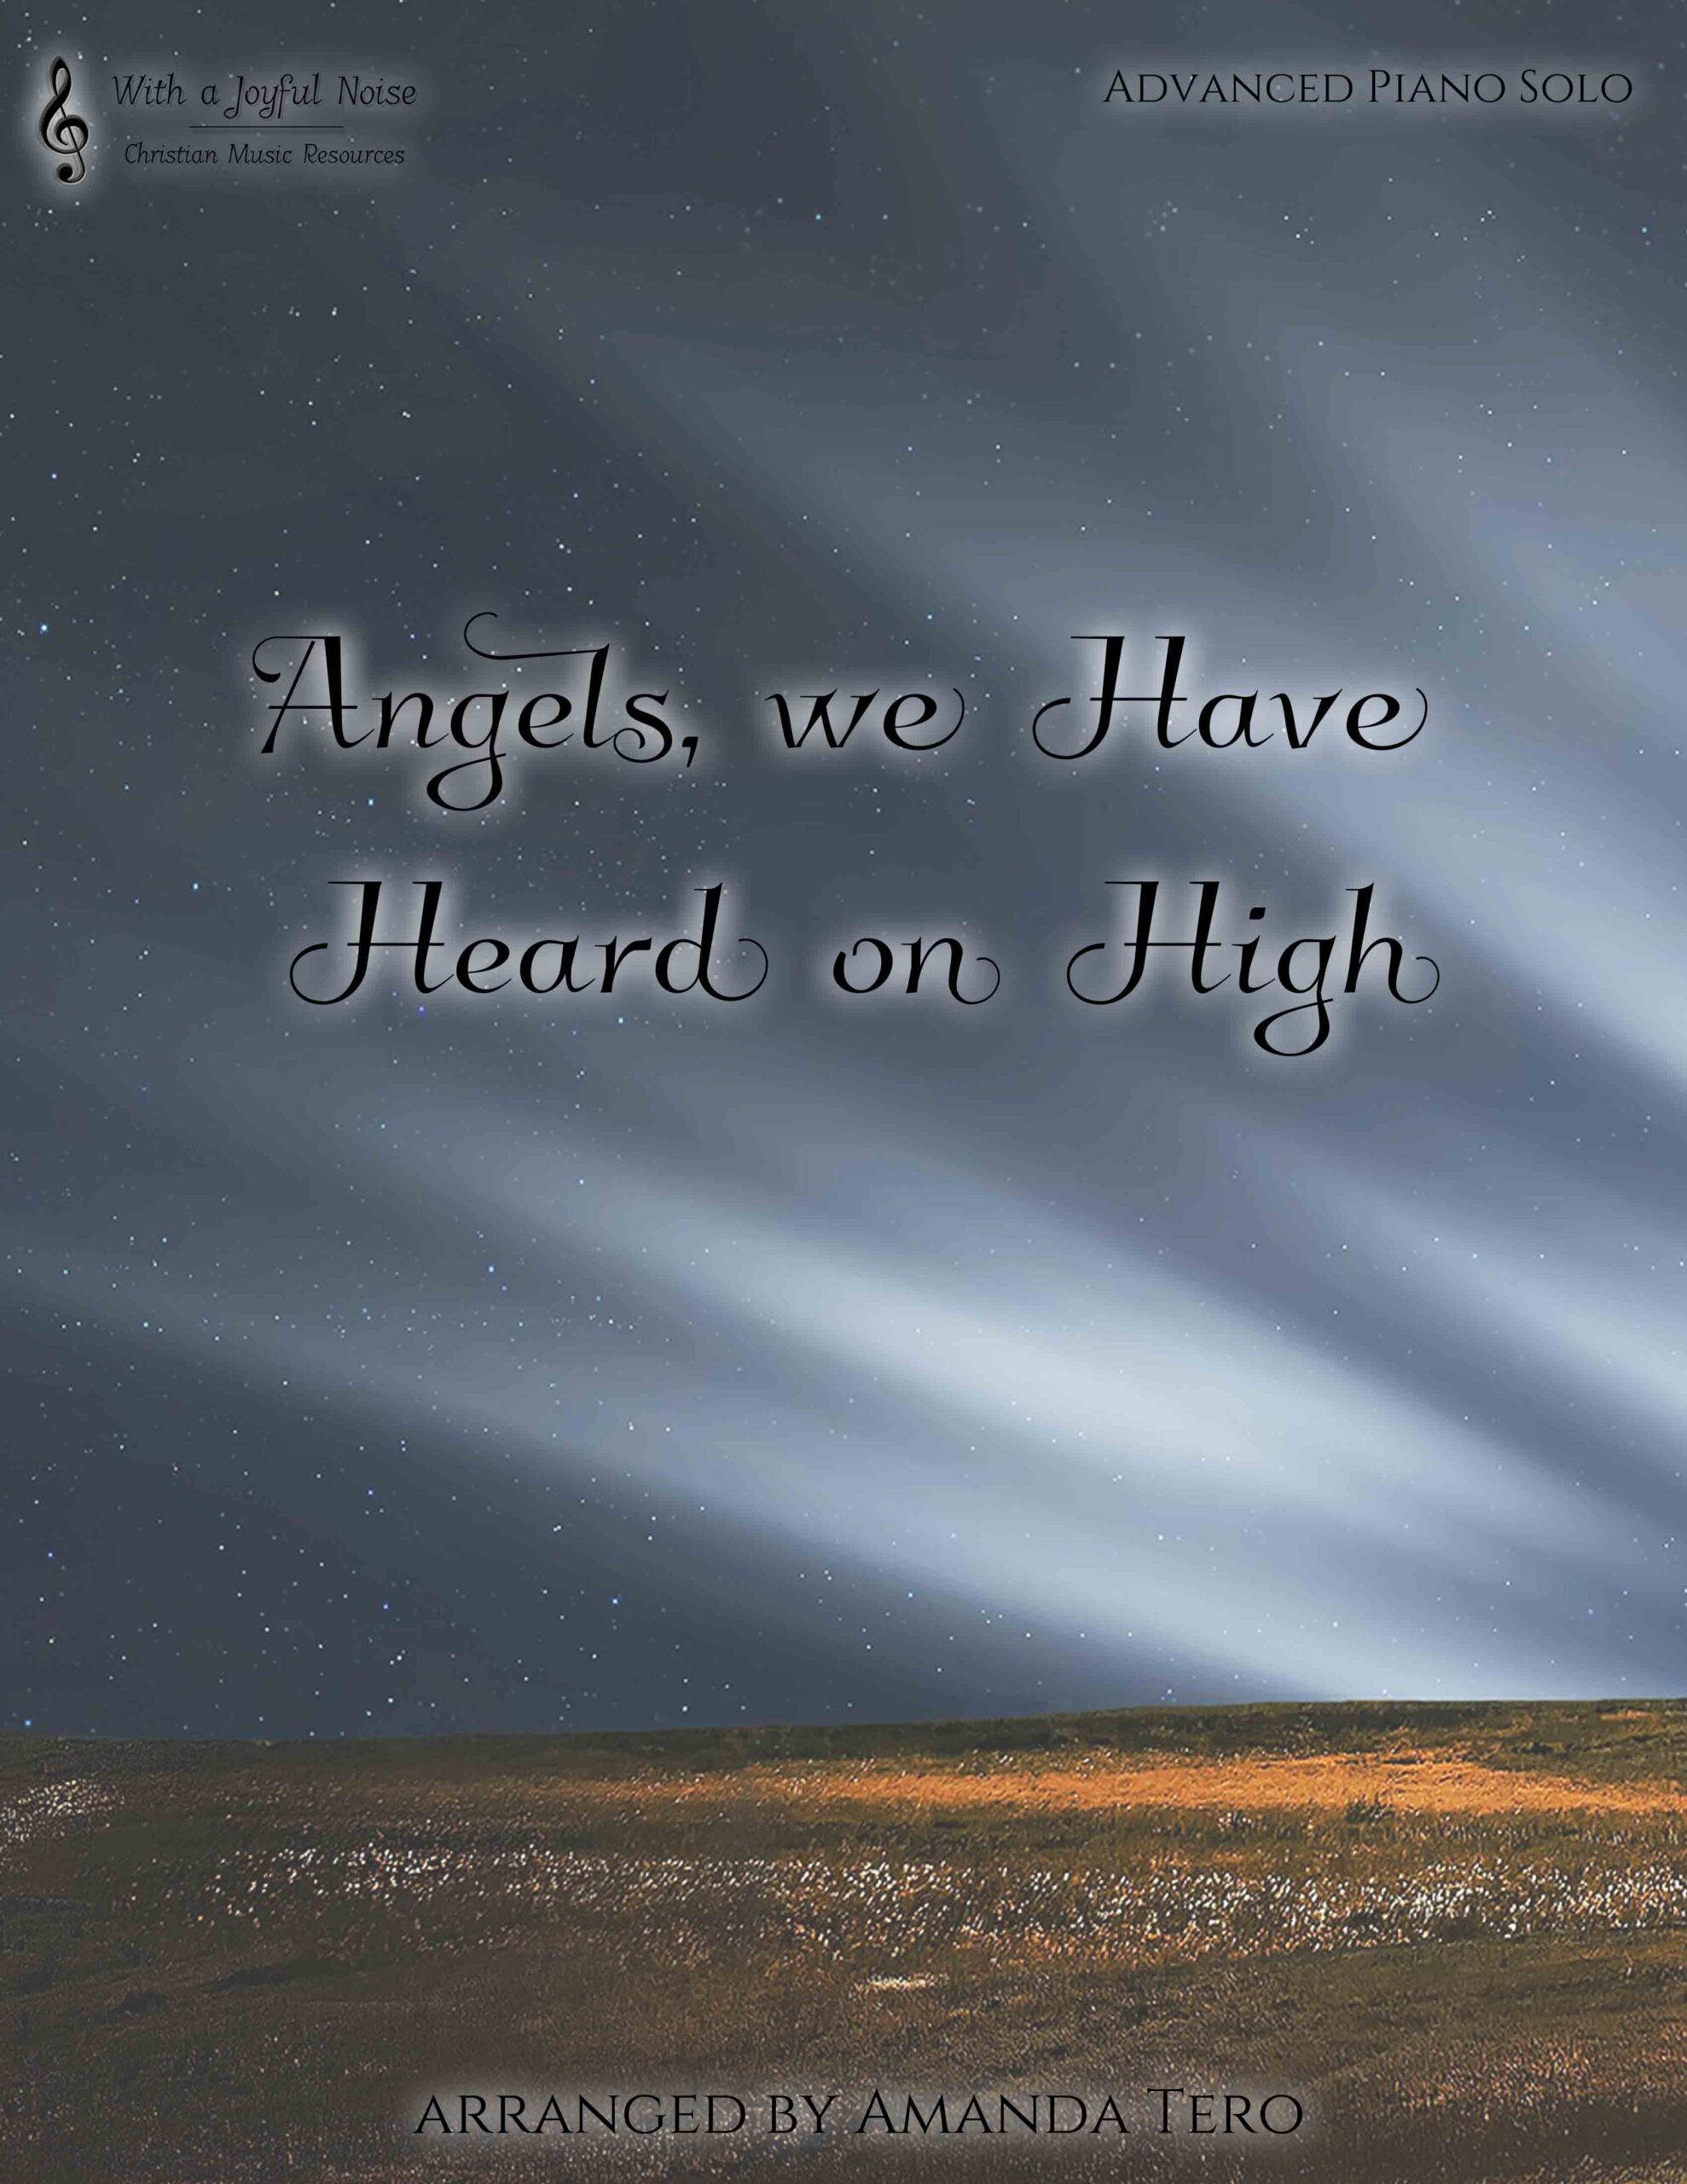 Angels We Have Heard on High – Early Advanced piano solo